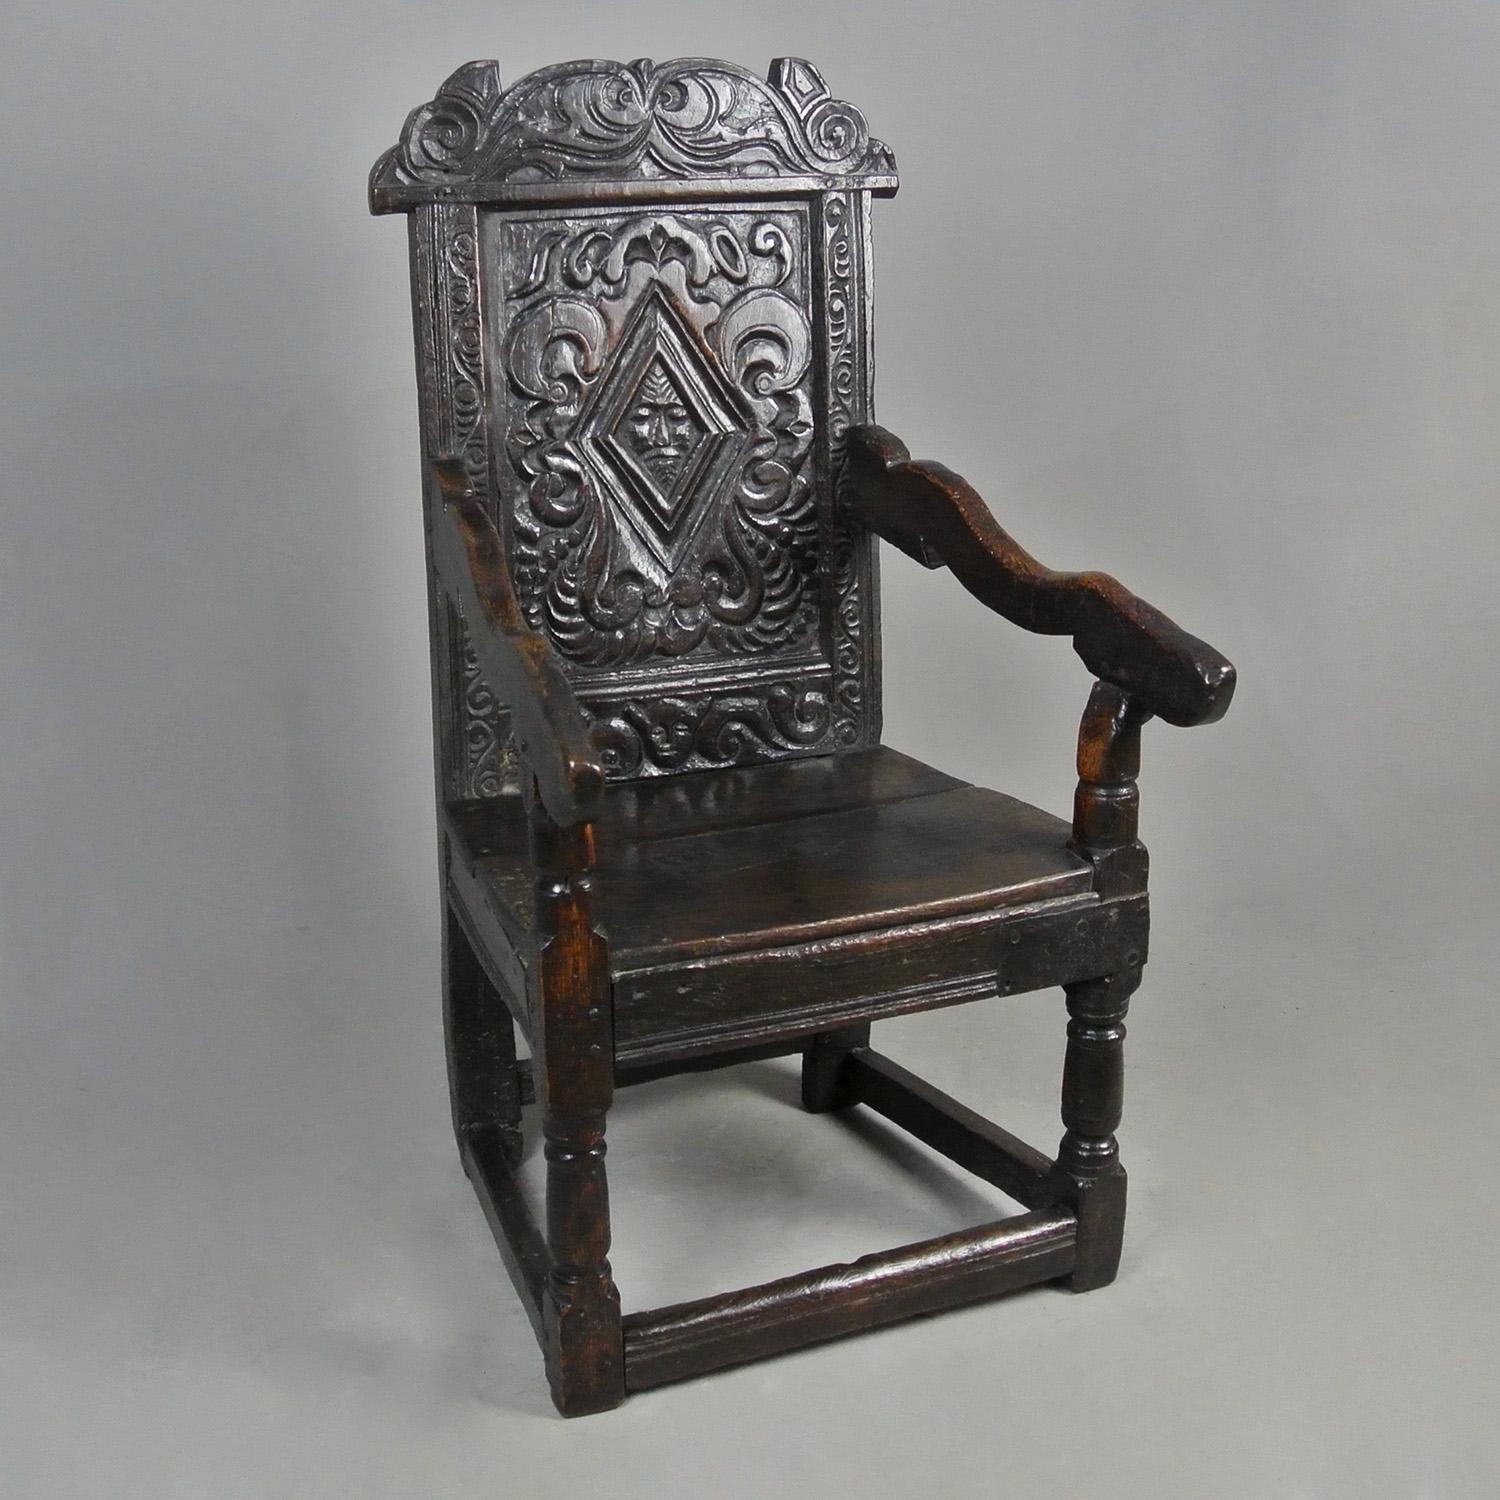 An extremely rare and exquisitely carved English oak wainscot chair dated 1609 and with two figural masks – the central mask possibly the ‘Green Man’ with foliage scrolling and falling around his face like hair or potentially a portrait of the